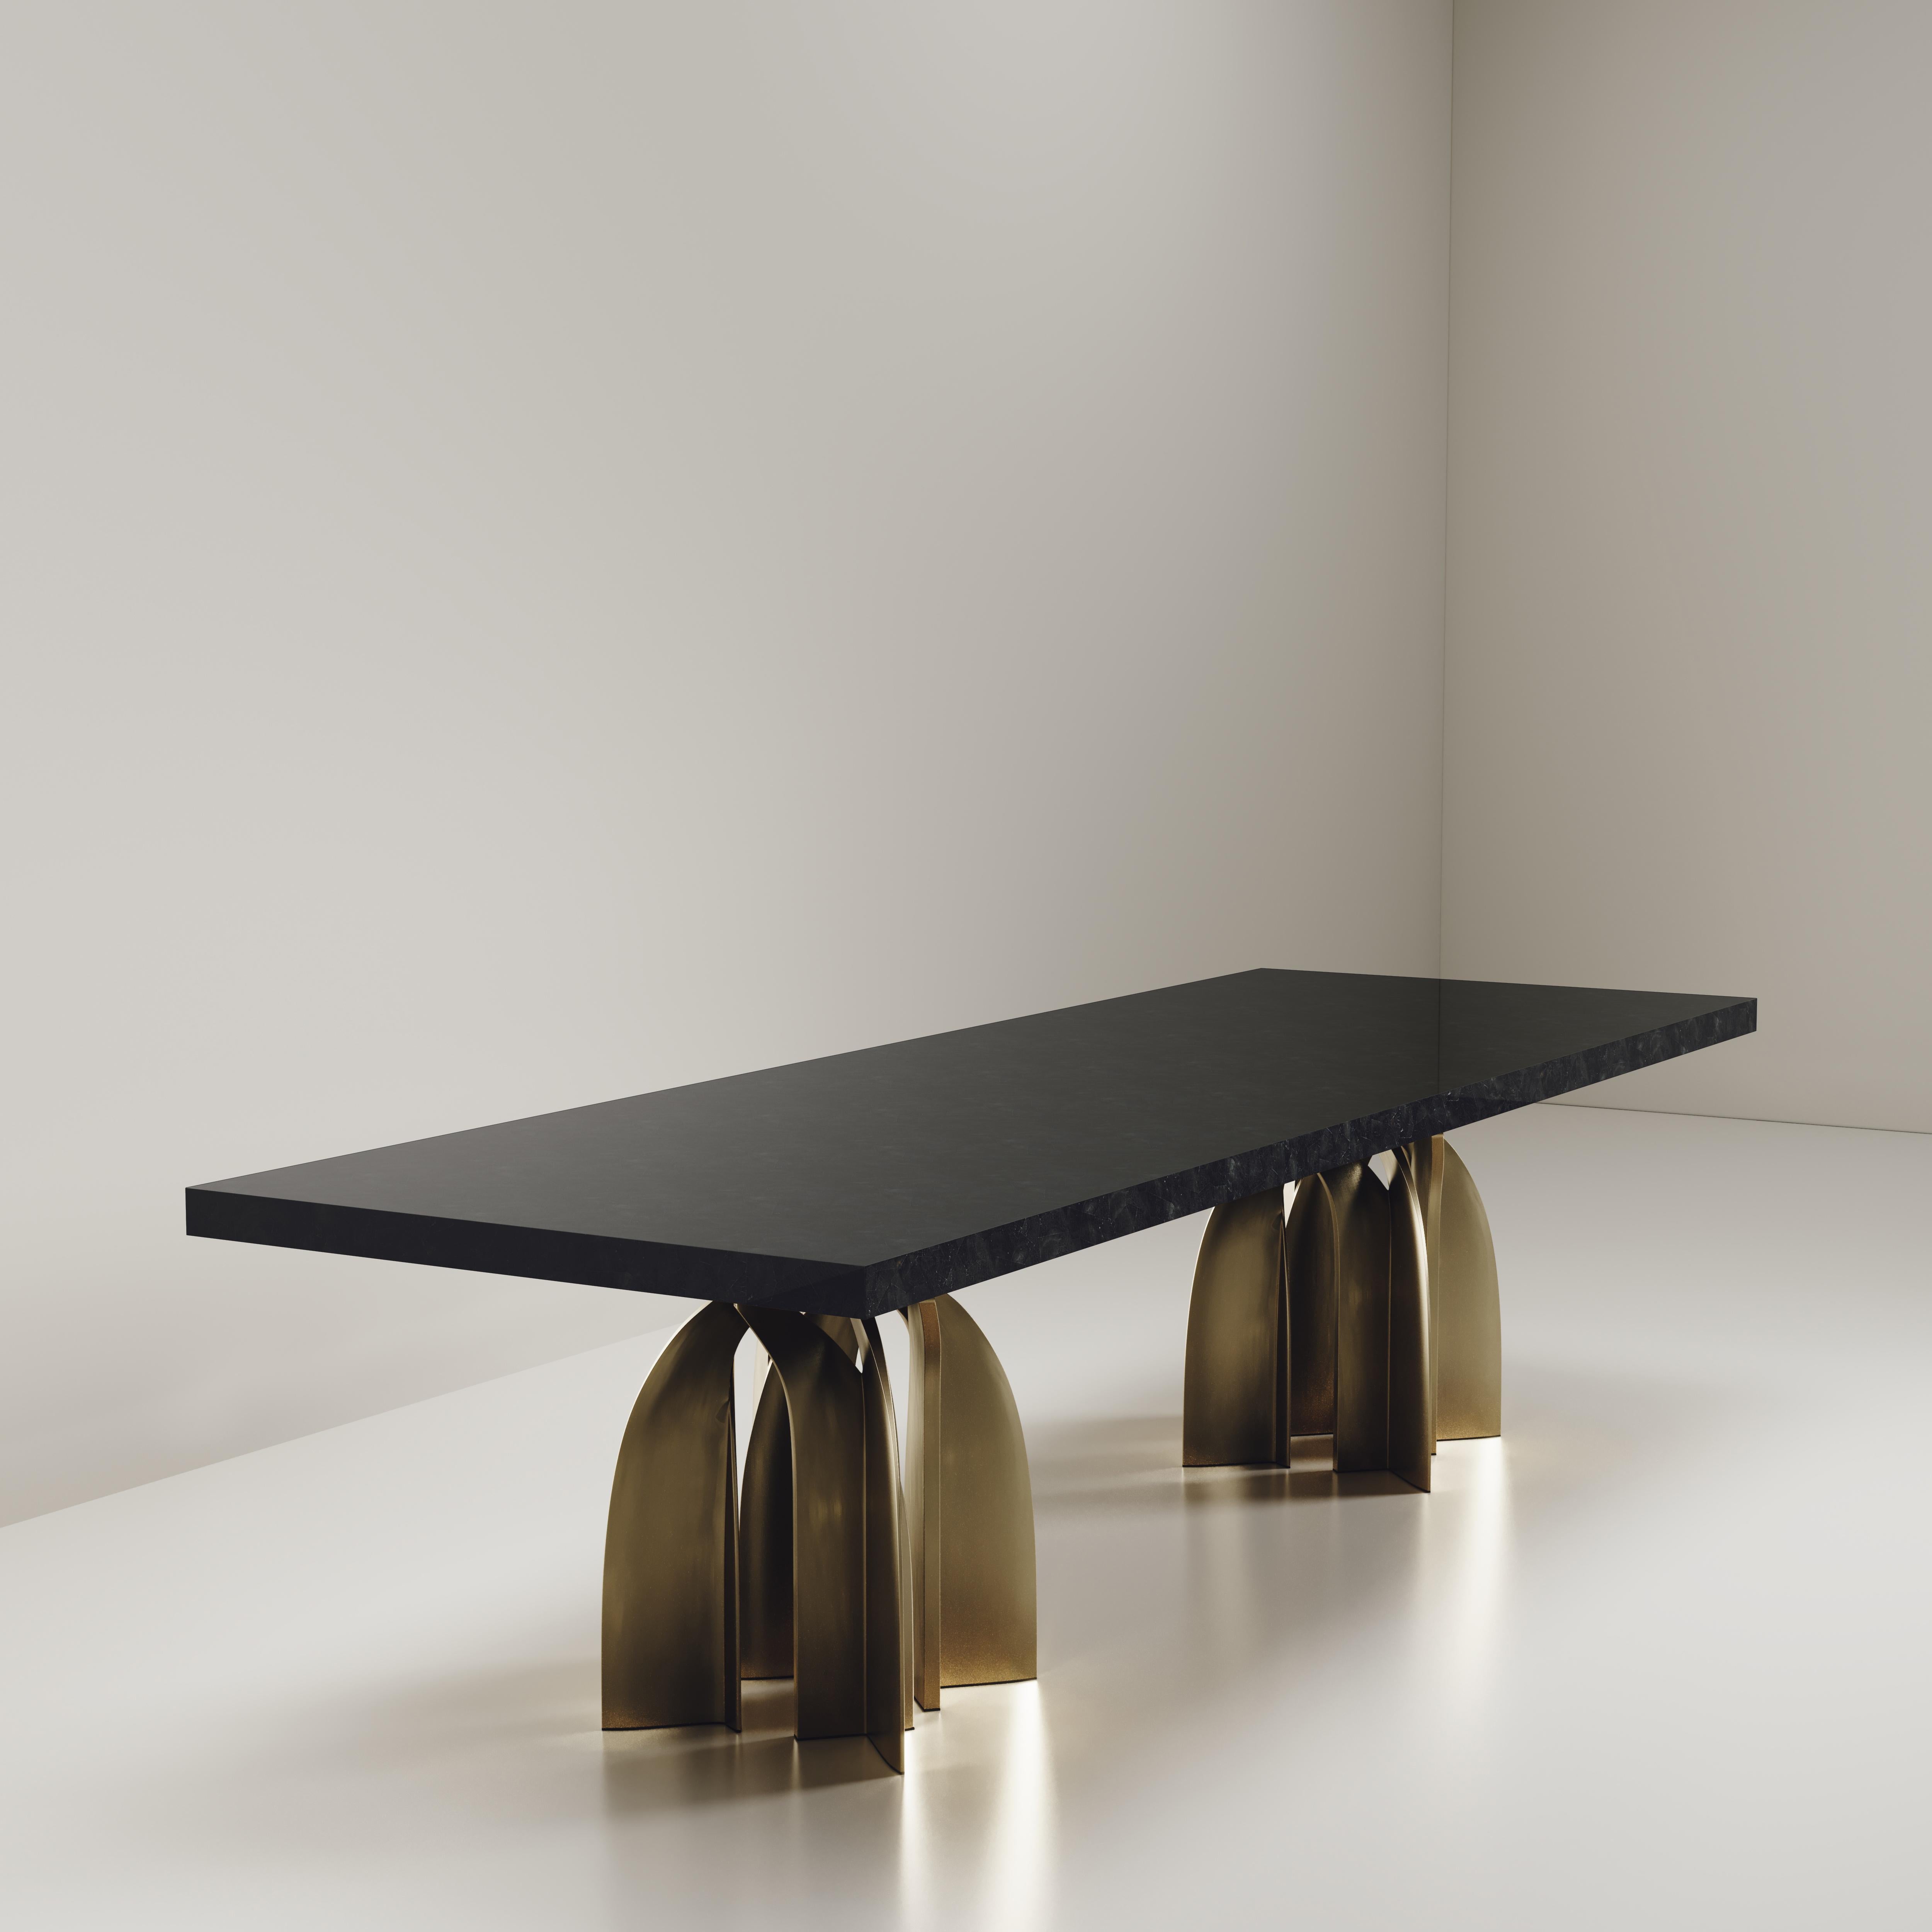 French Set of Sculptural Chairs and Dining Table in Shell and Brass by Kifu Paris For Sale